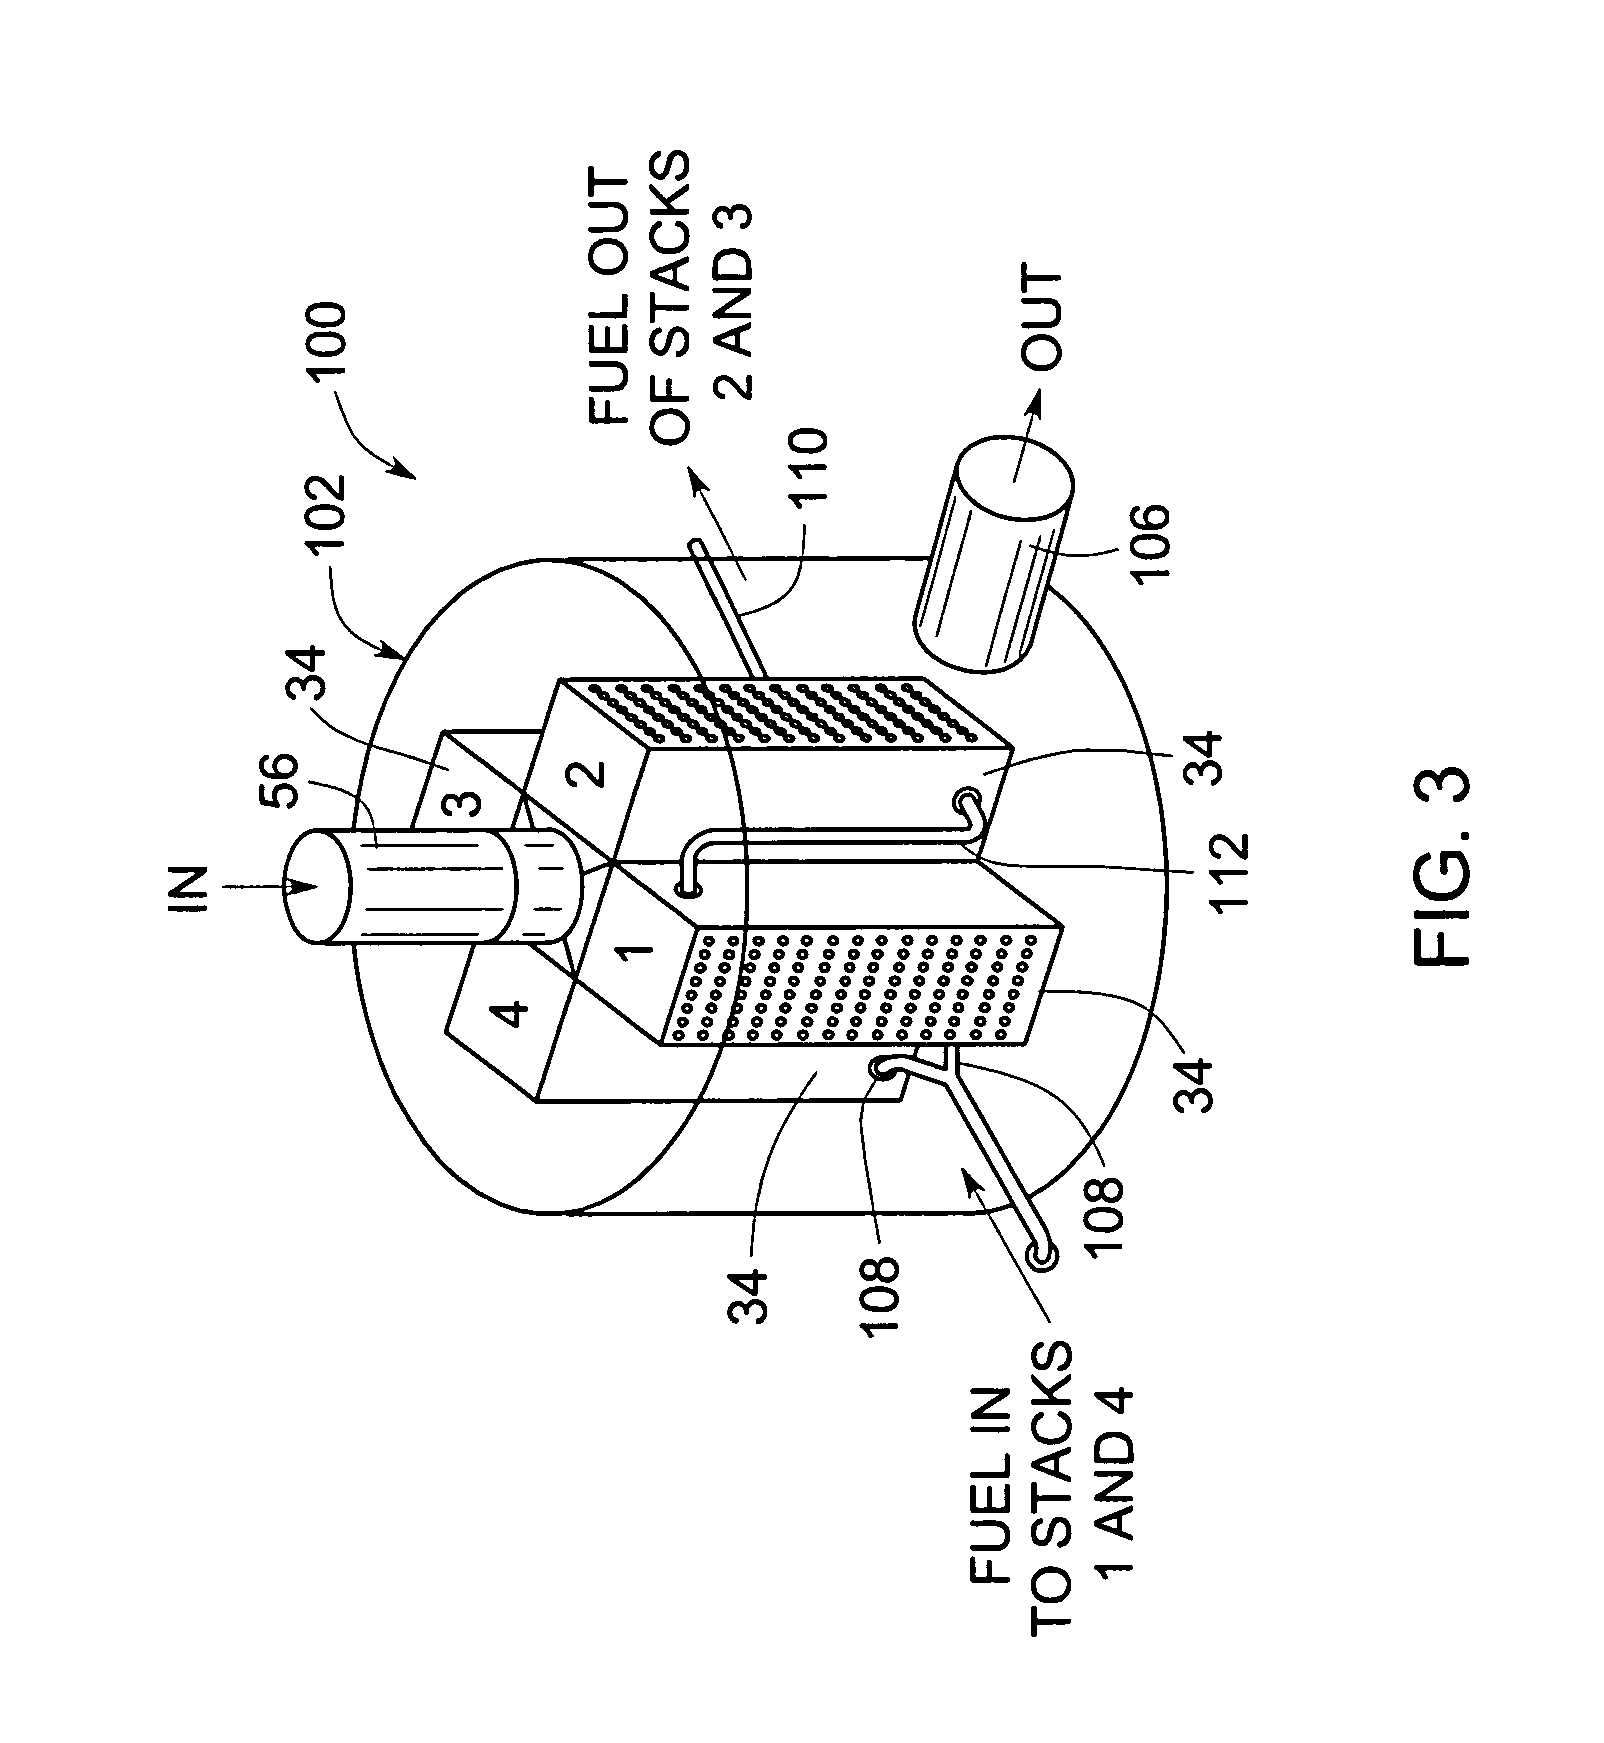 Cooled turbine integrated fuel cell hybrid power plant